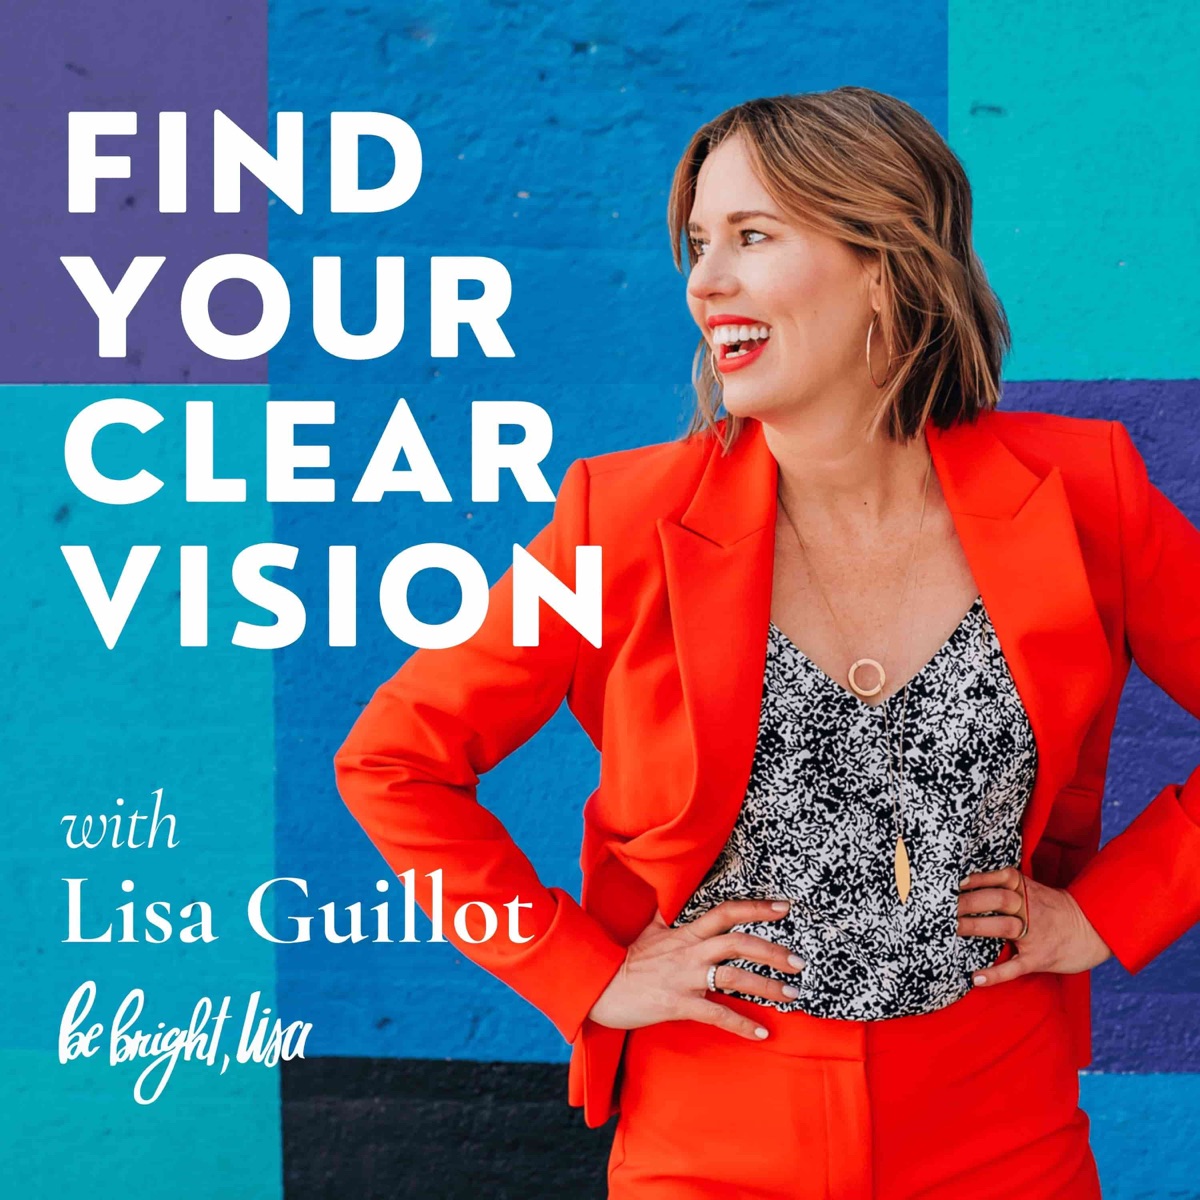 Find Your Clear Vision: The Book